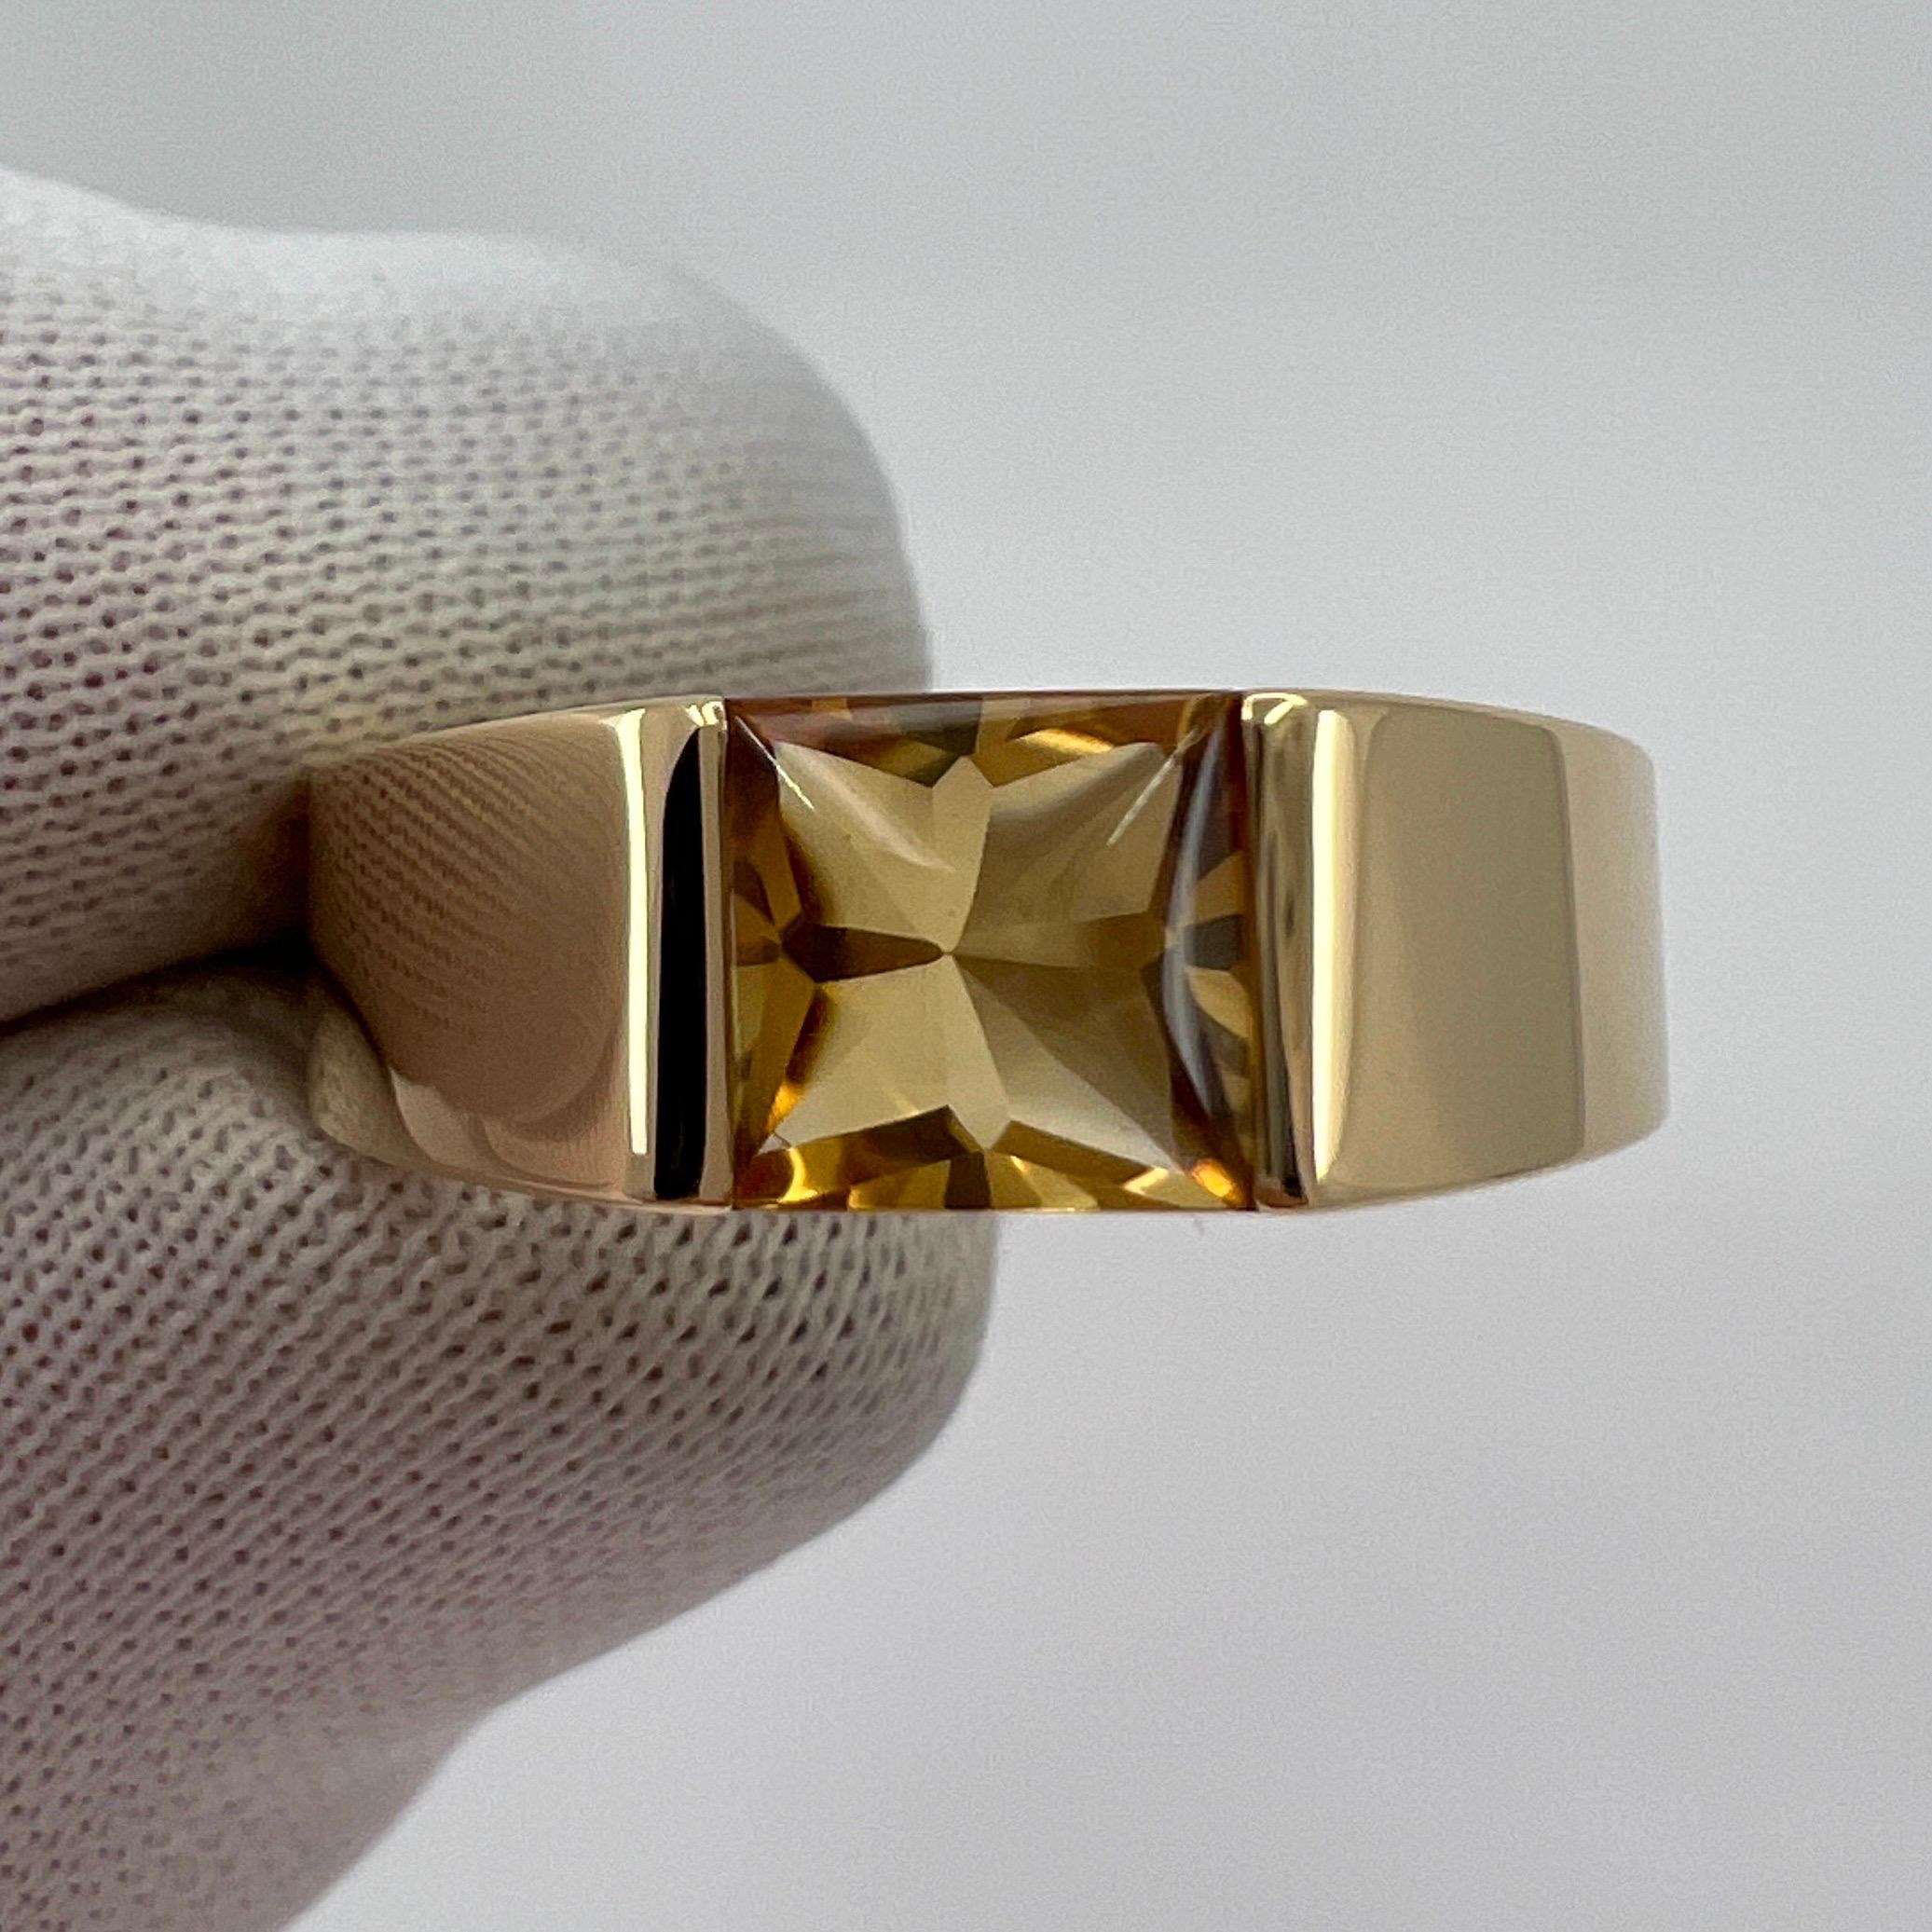 Square Cut Cartier Rare Vintage Vivid Yellow Citrine 18k Yellow Gold Tank Band Solo Ring